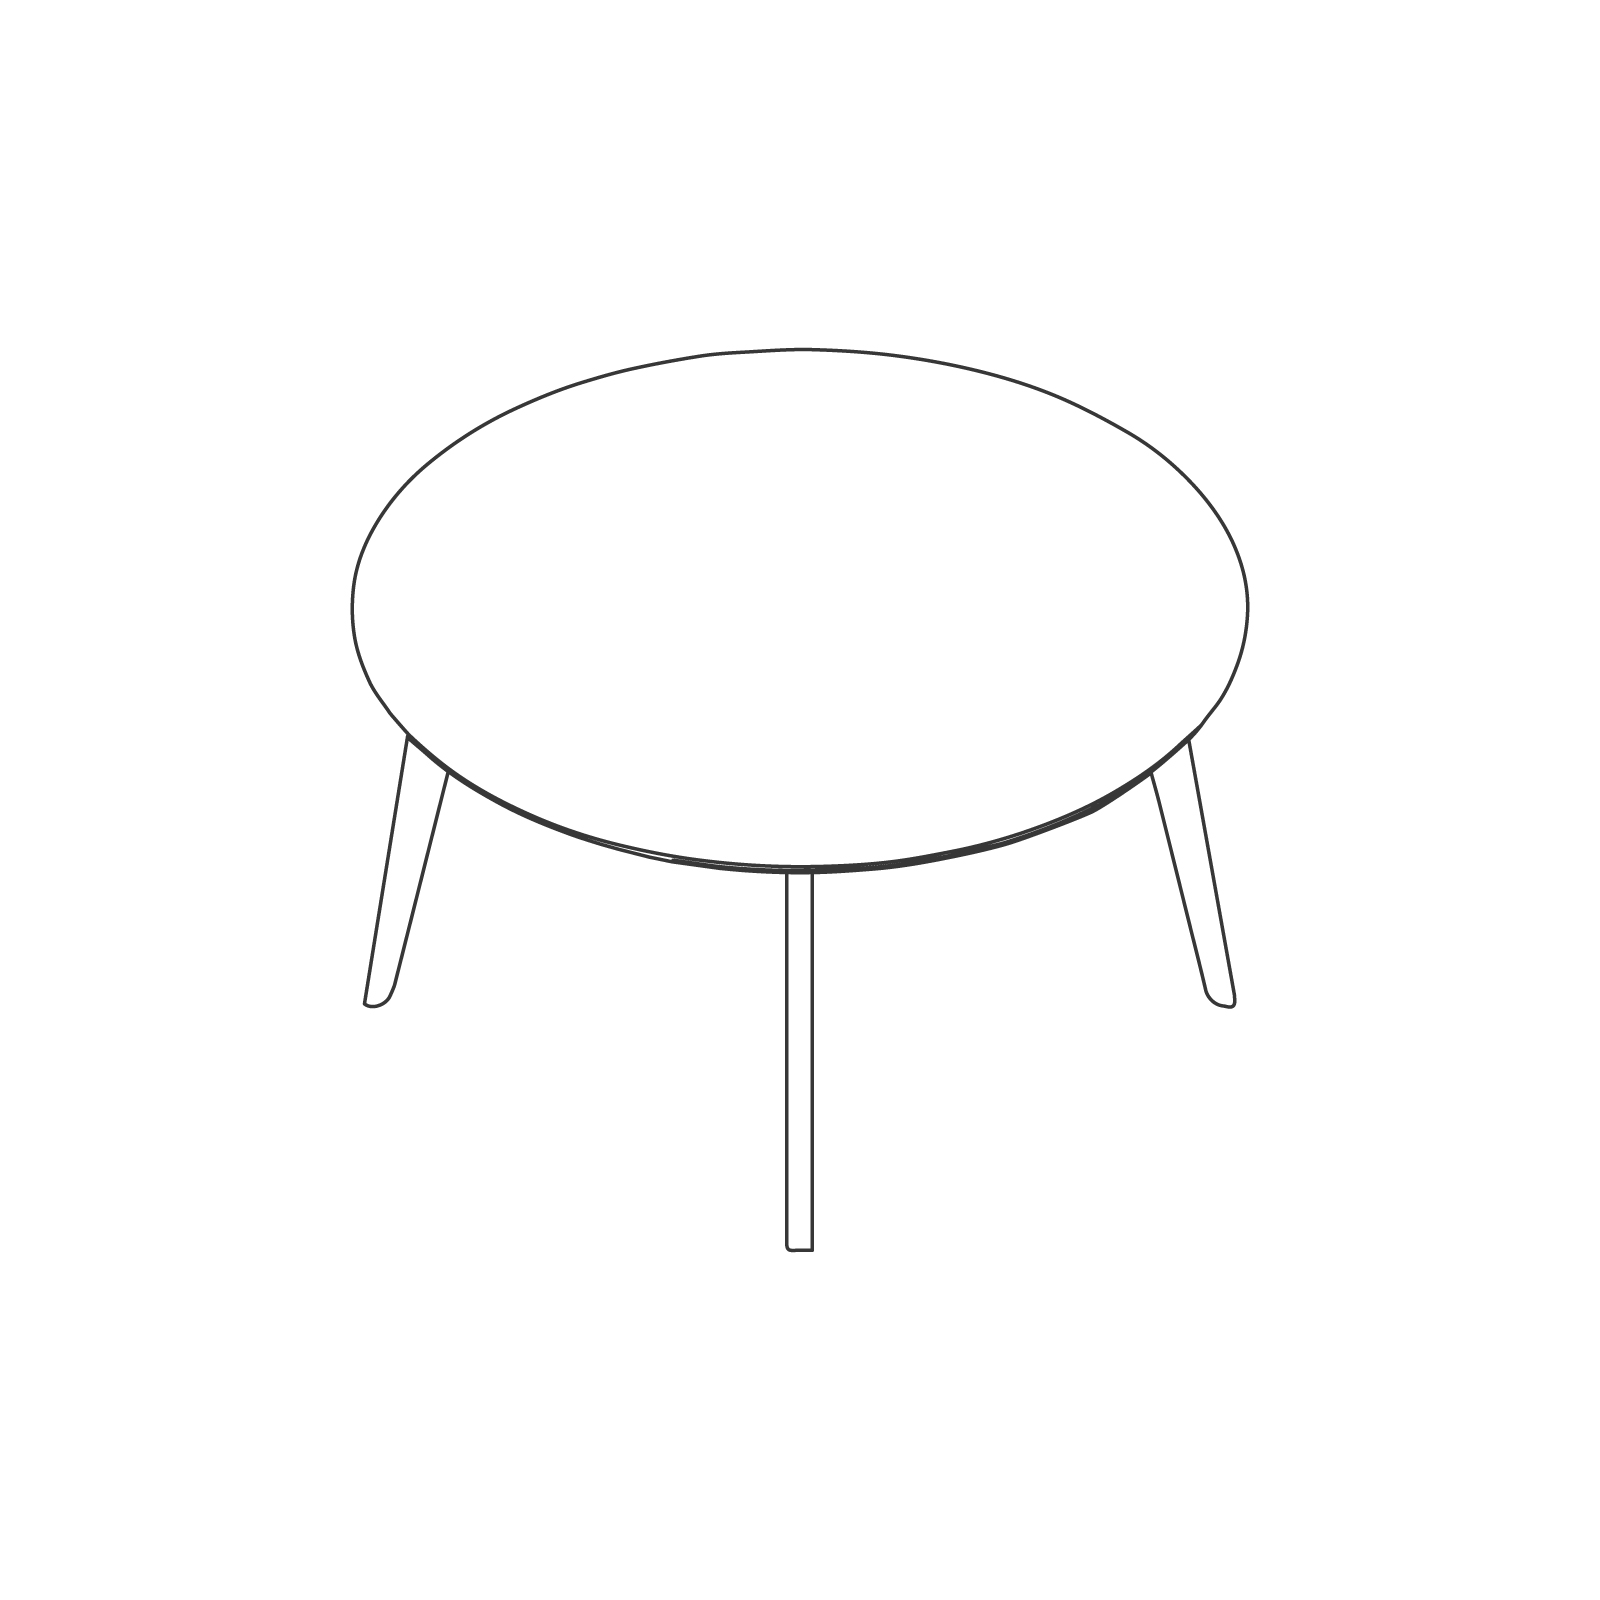 A line drawing of Dalby Conference Table–Round.